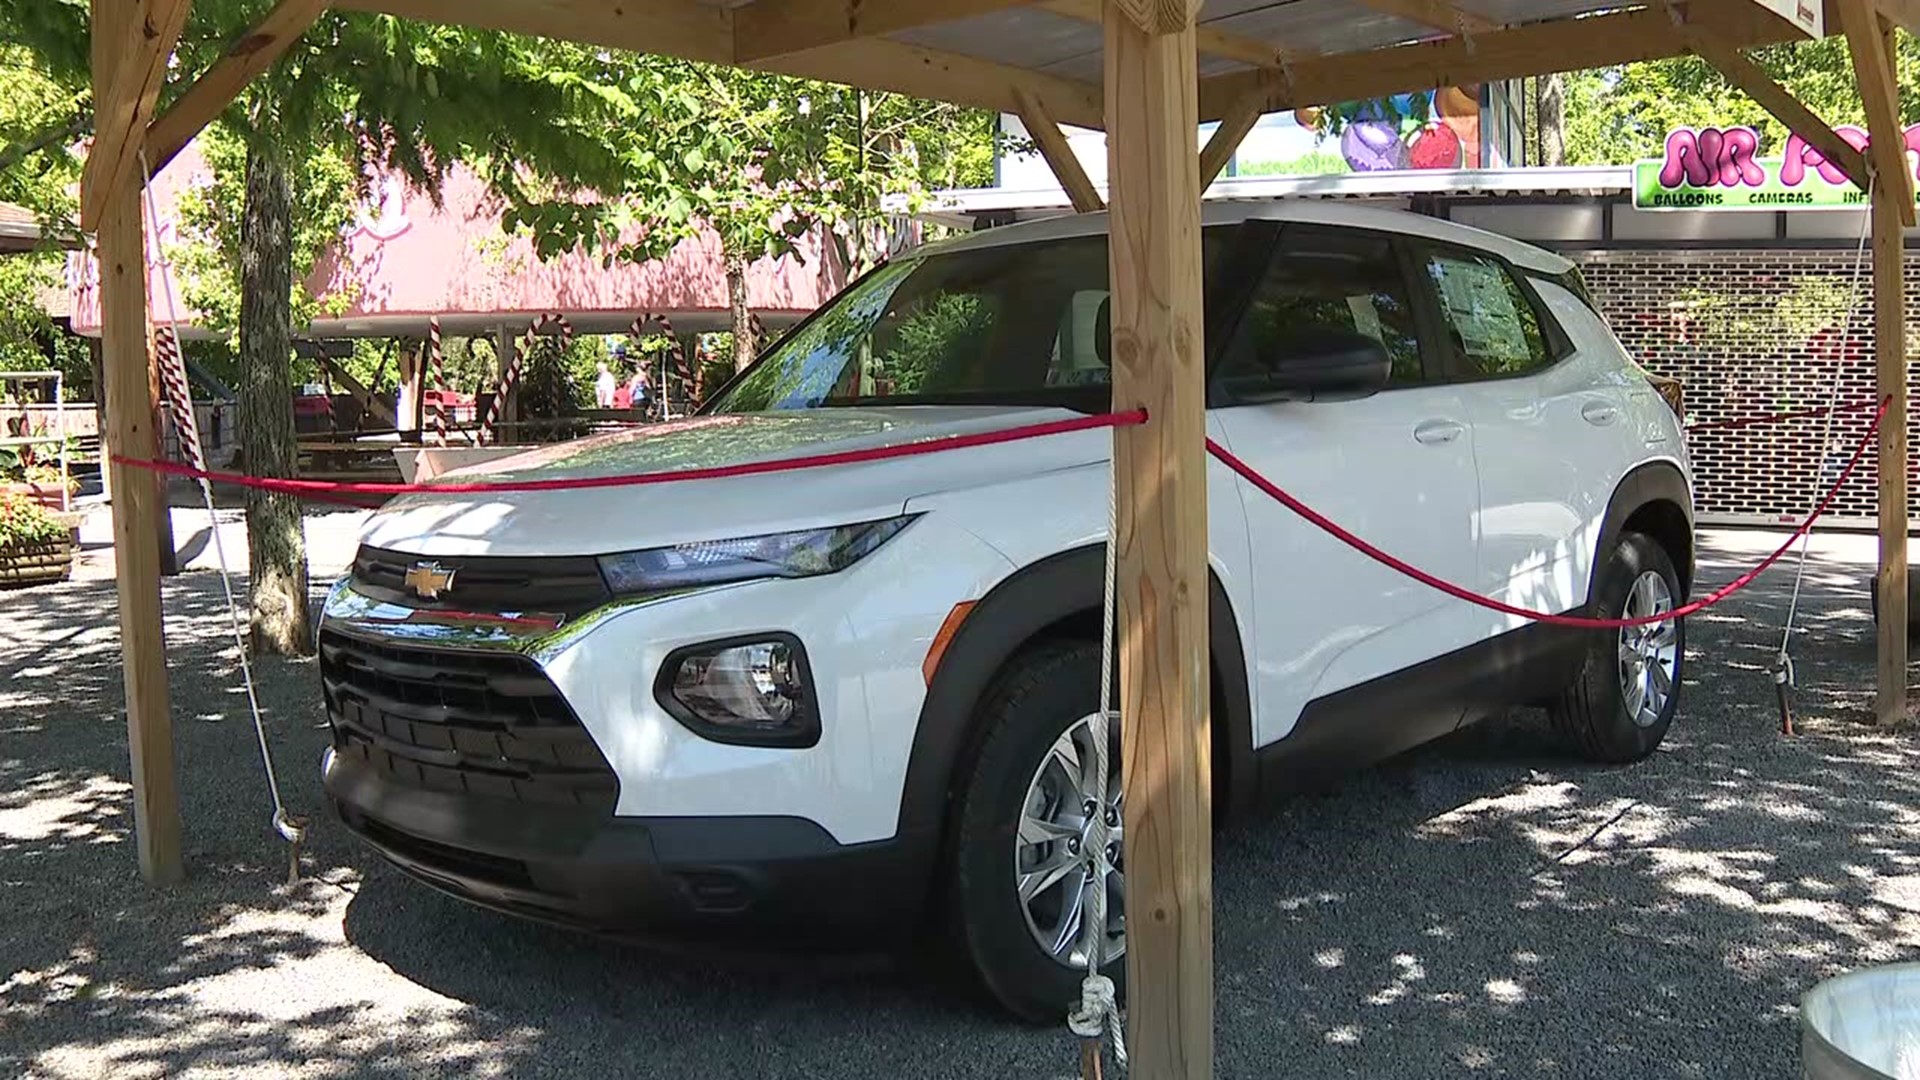 Businesses are trying to find ways to attract and retain workers as the pandemic winds down.  Knoebels Amusement Resort is giving away an SUV as an incentive.